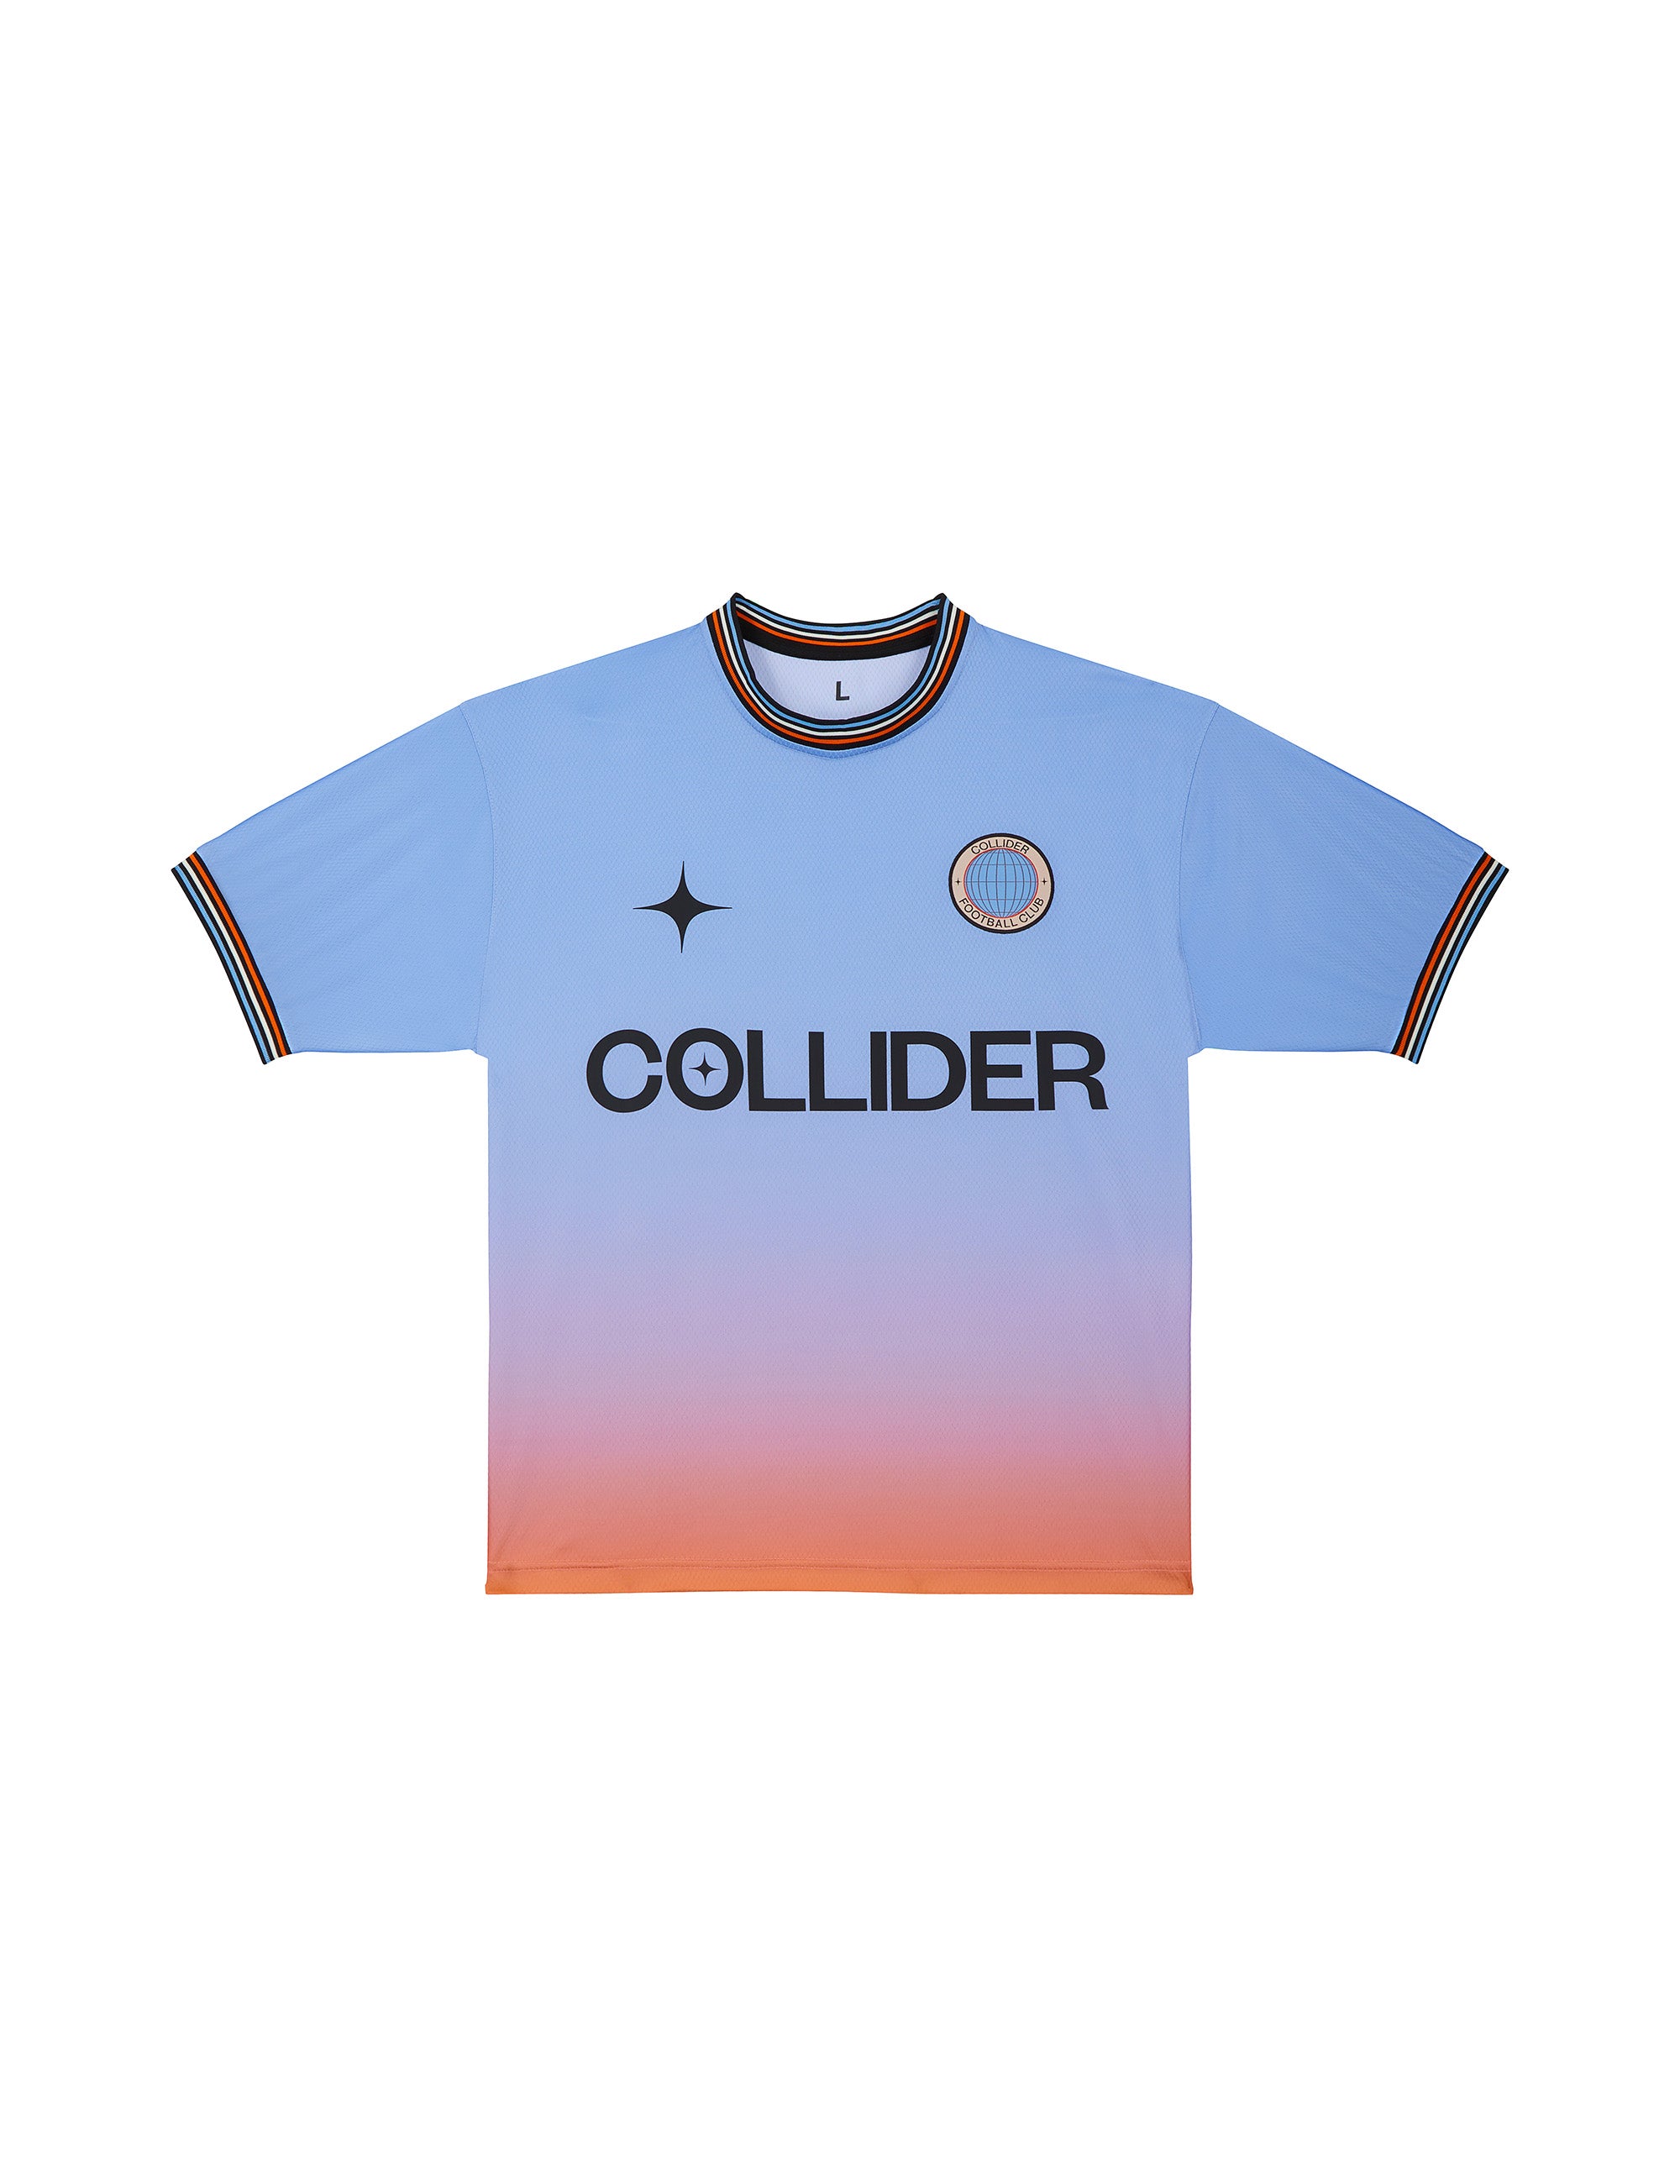 Introducing the Collider Football Club Away Shirt for the 2024 season. In collaboration with @fullkitwnkrs.